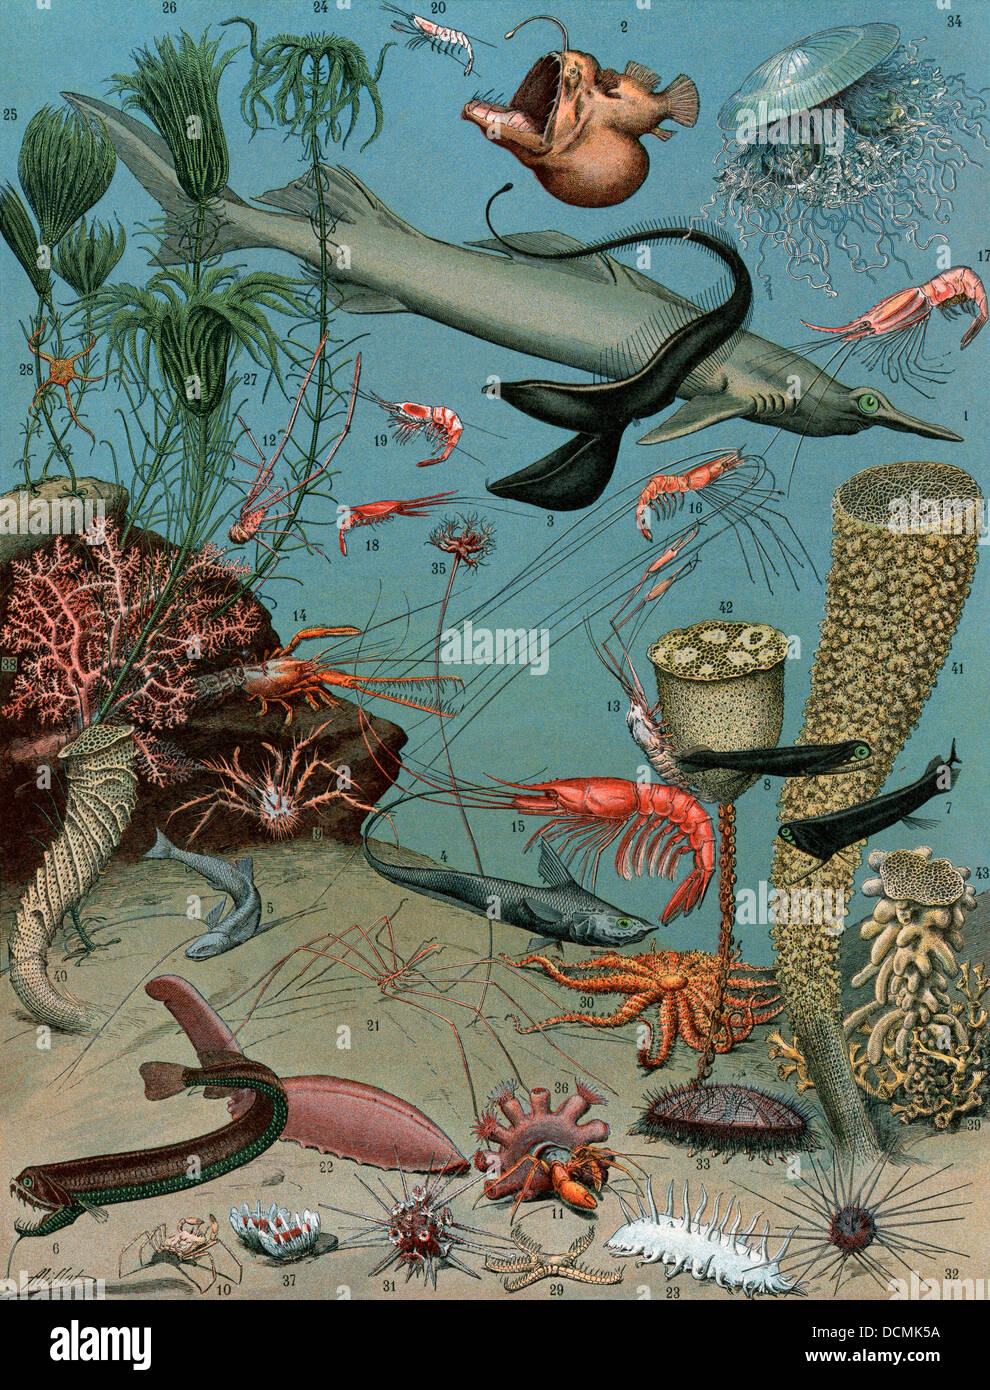 Creatures of the sea floor, including fish, starfish, sea urchins, crustaceans, polyps. Color lithograph Stock Photo